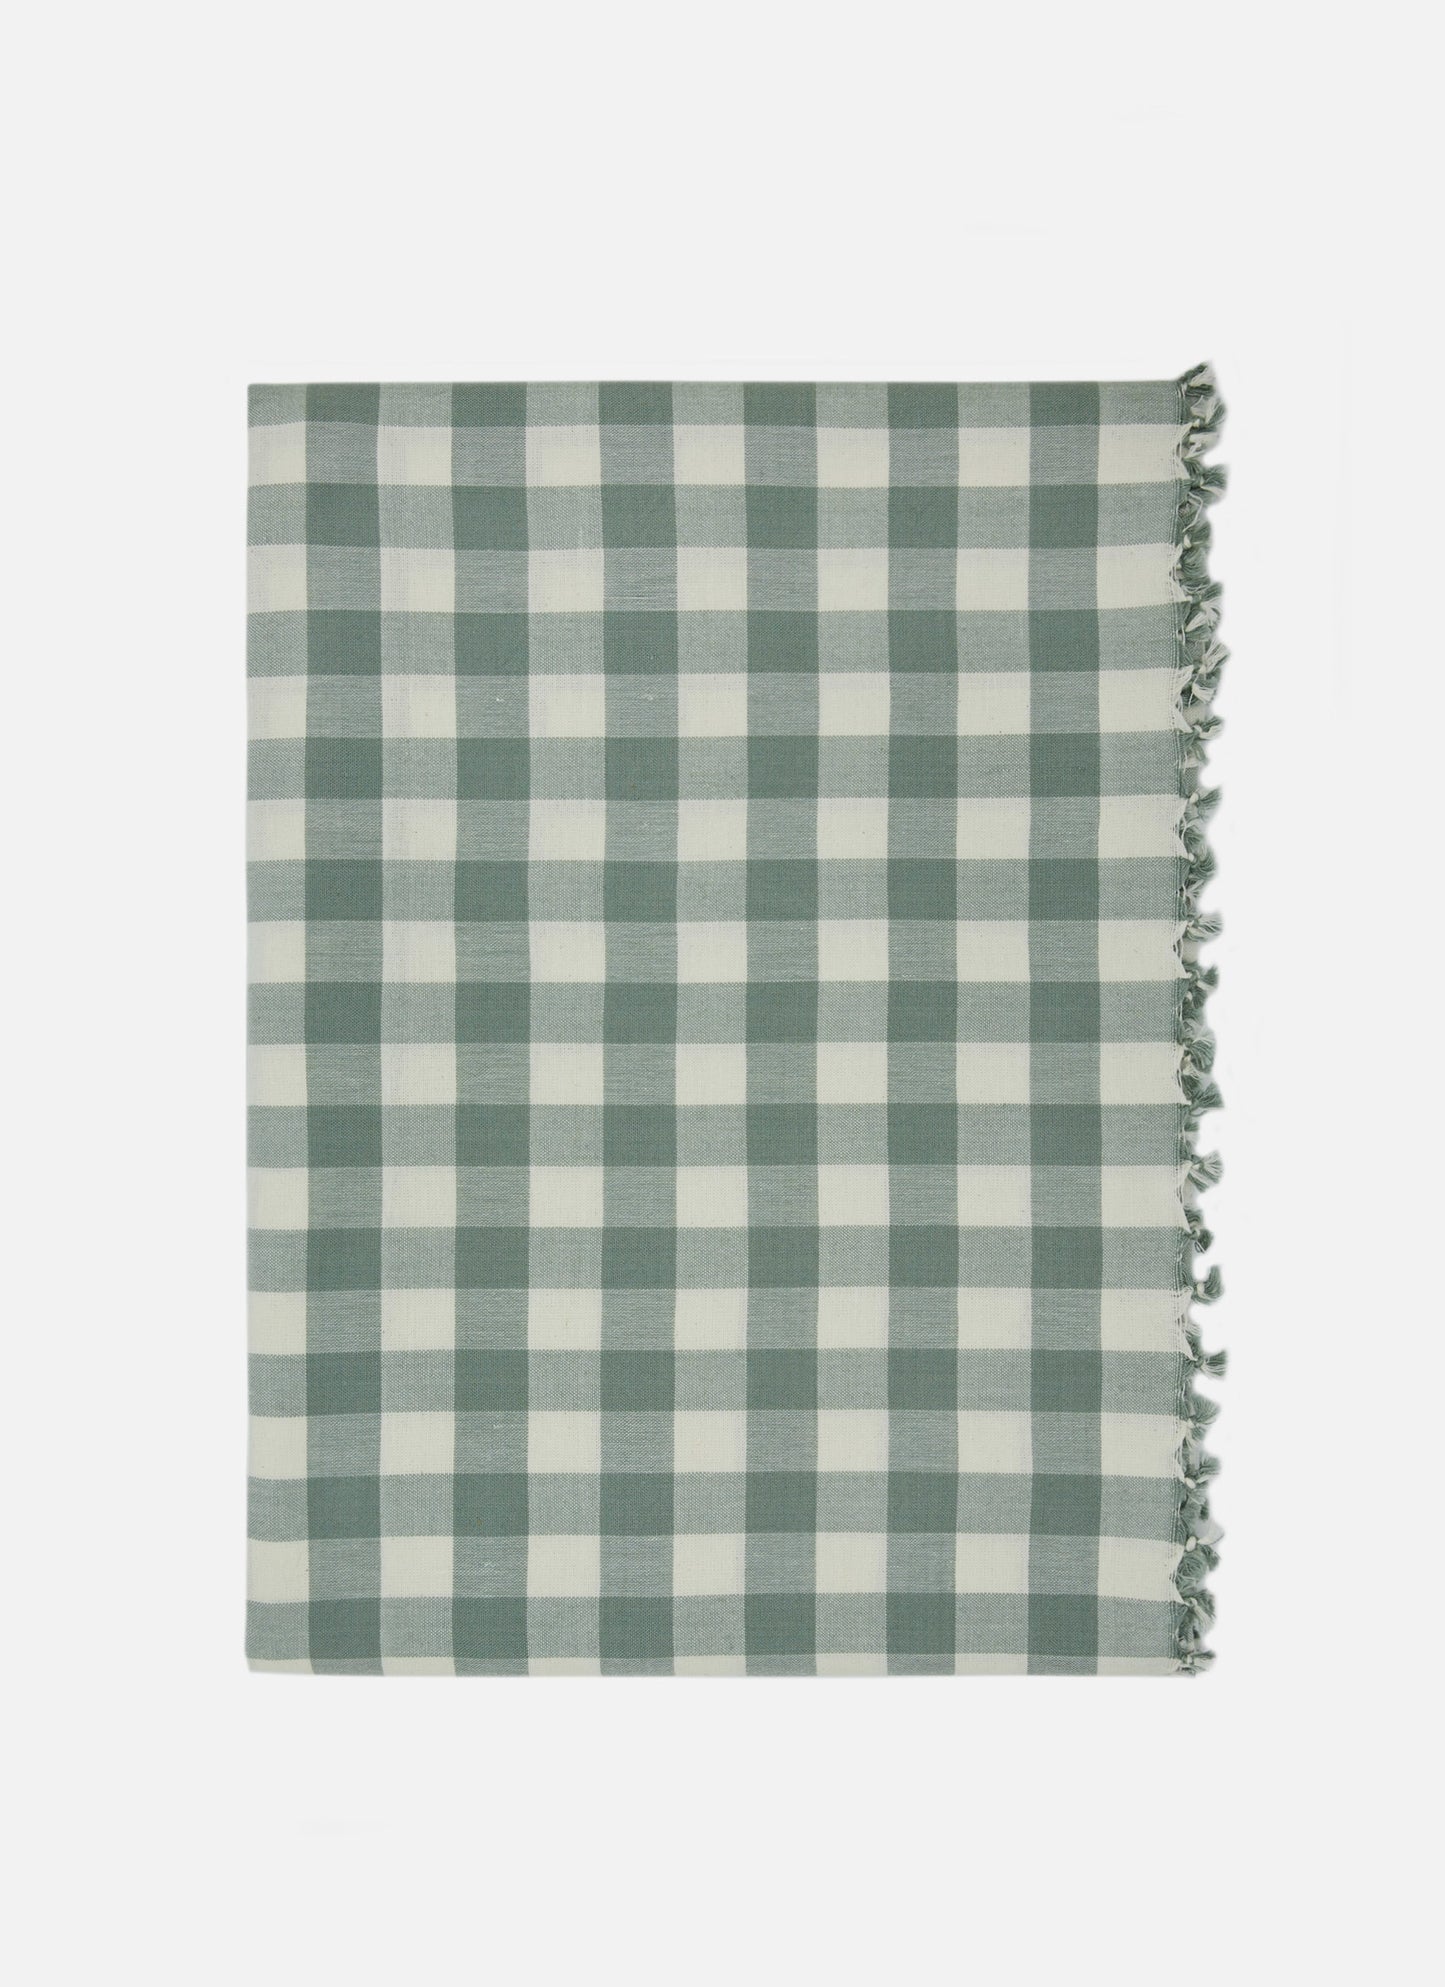 Woven Tablecloth: Gingham - Sage